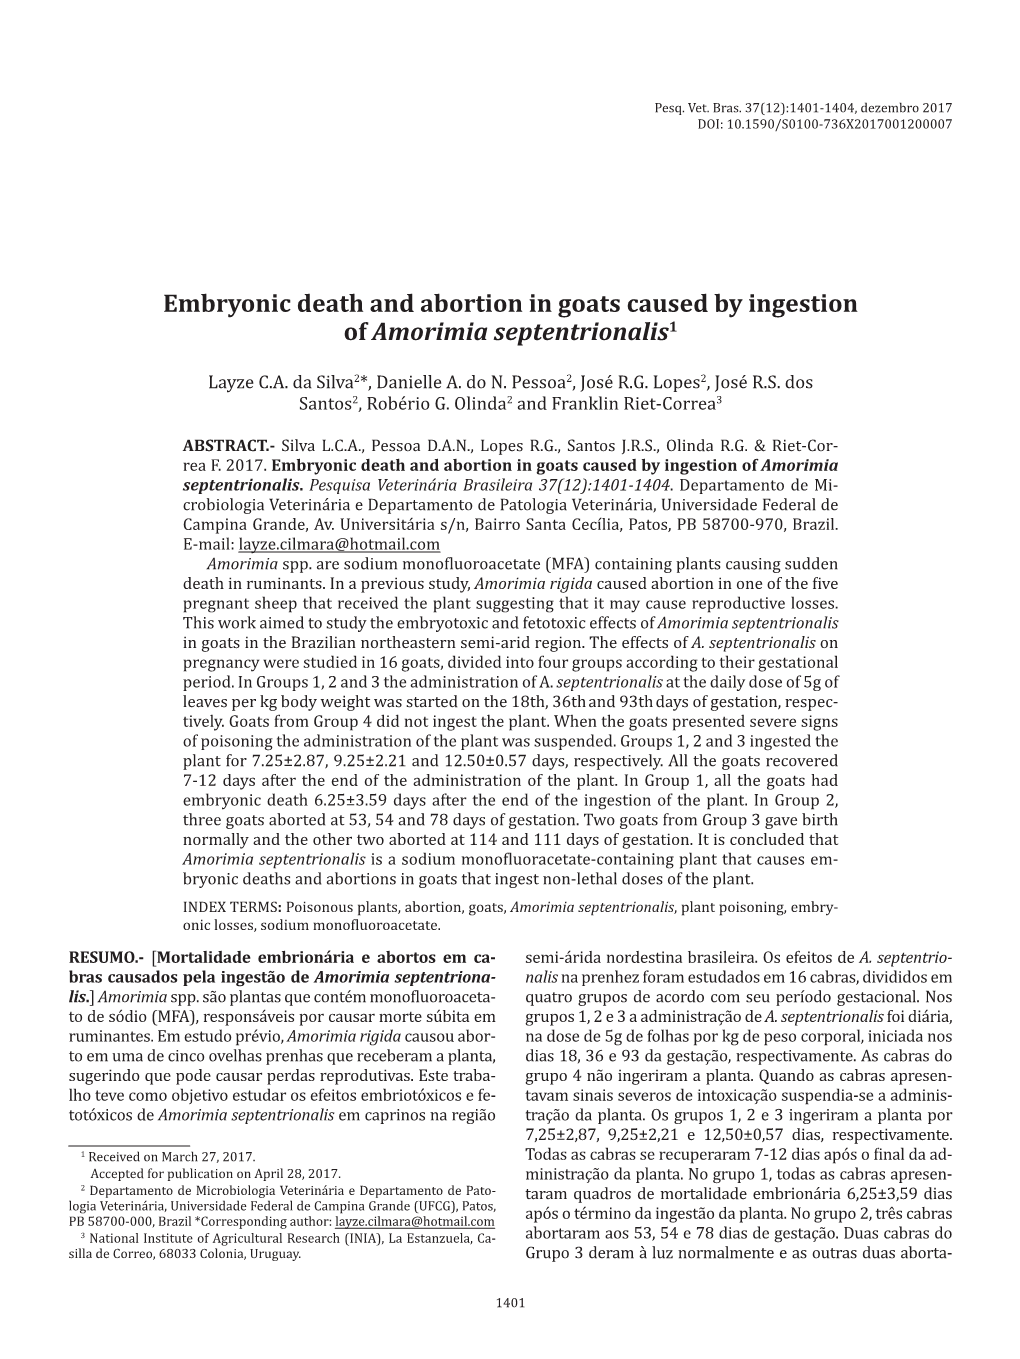 Embryonic Death and Abortion in Goats Caused by Ingestion of Amorimia Septentrionalis1